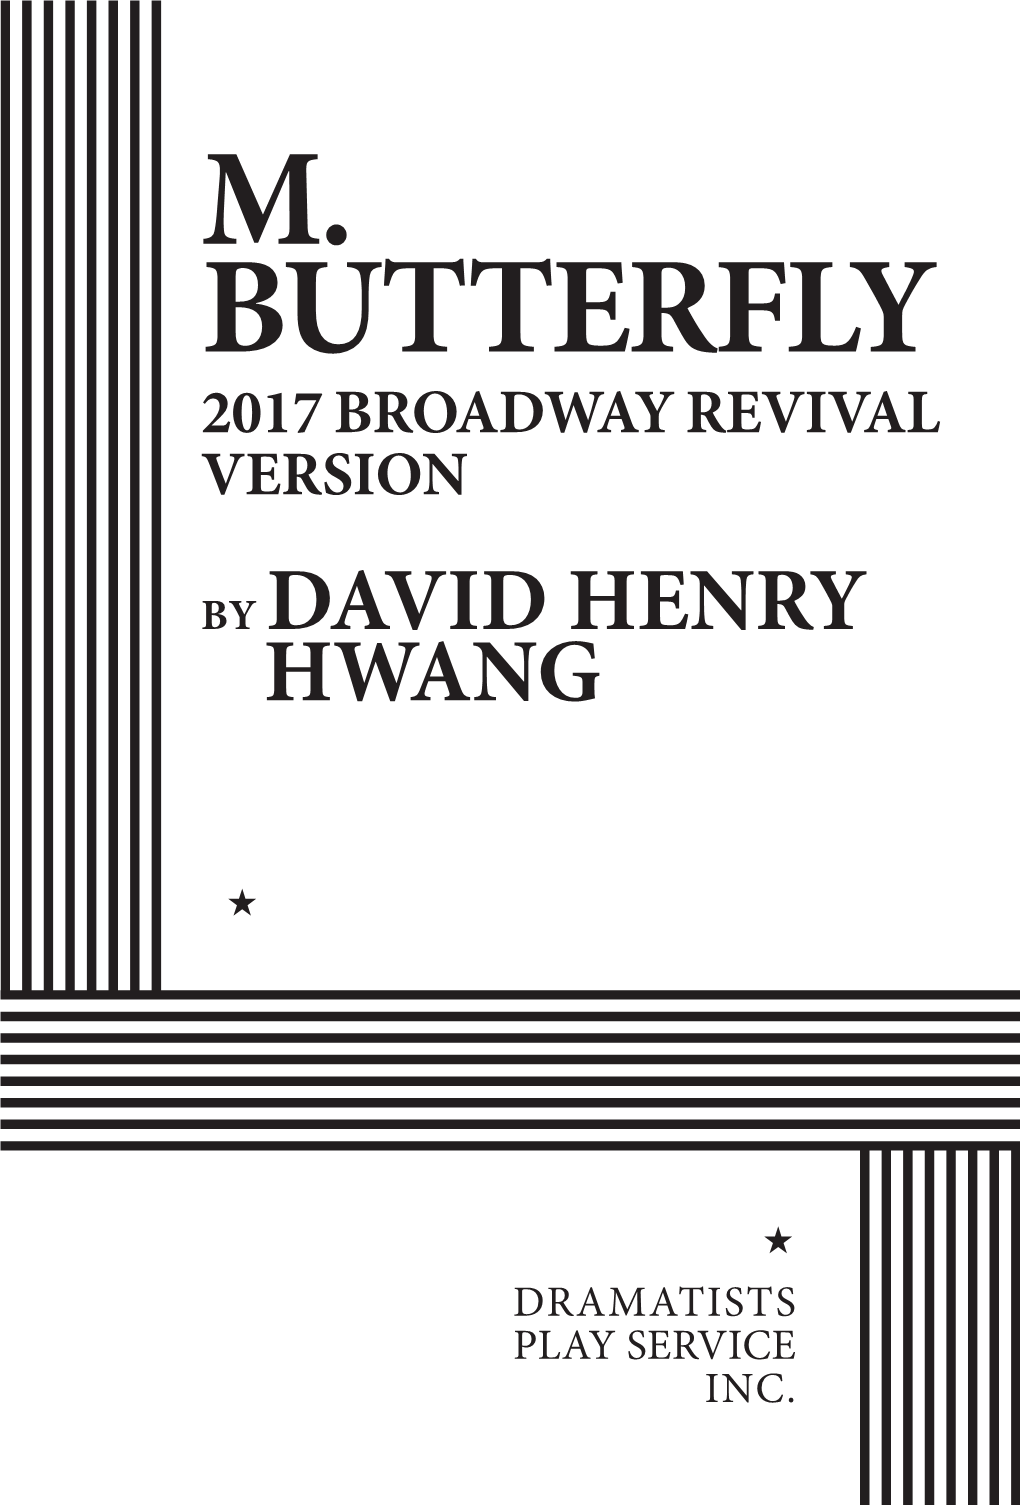 M. Butterfly 2017 Broadway Revival Version